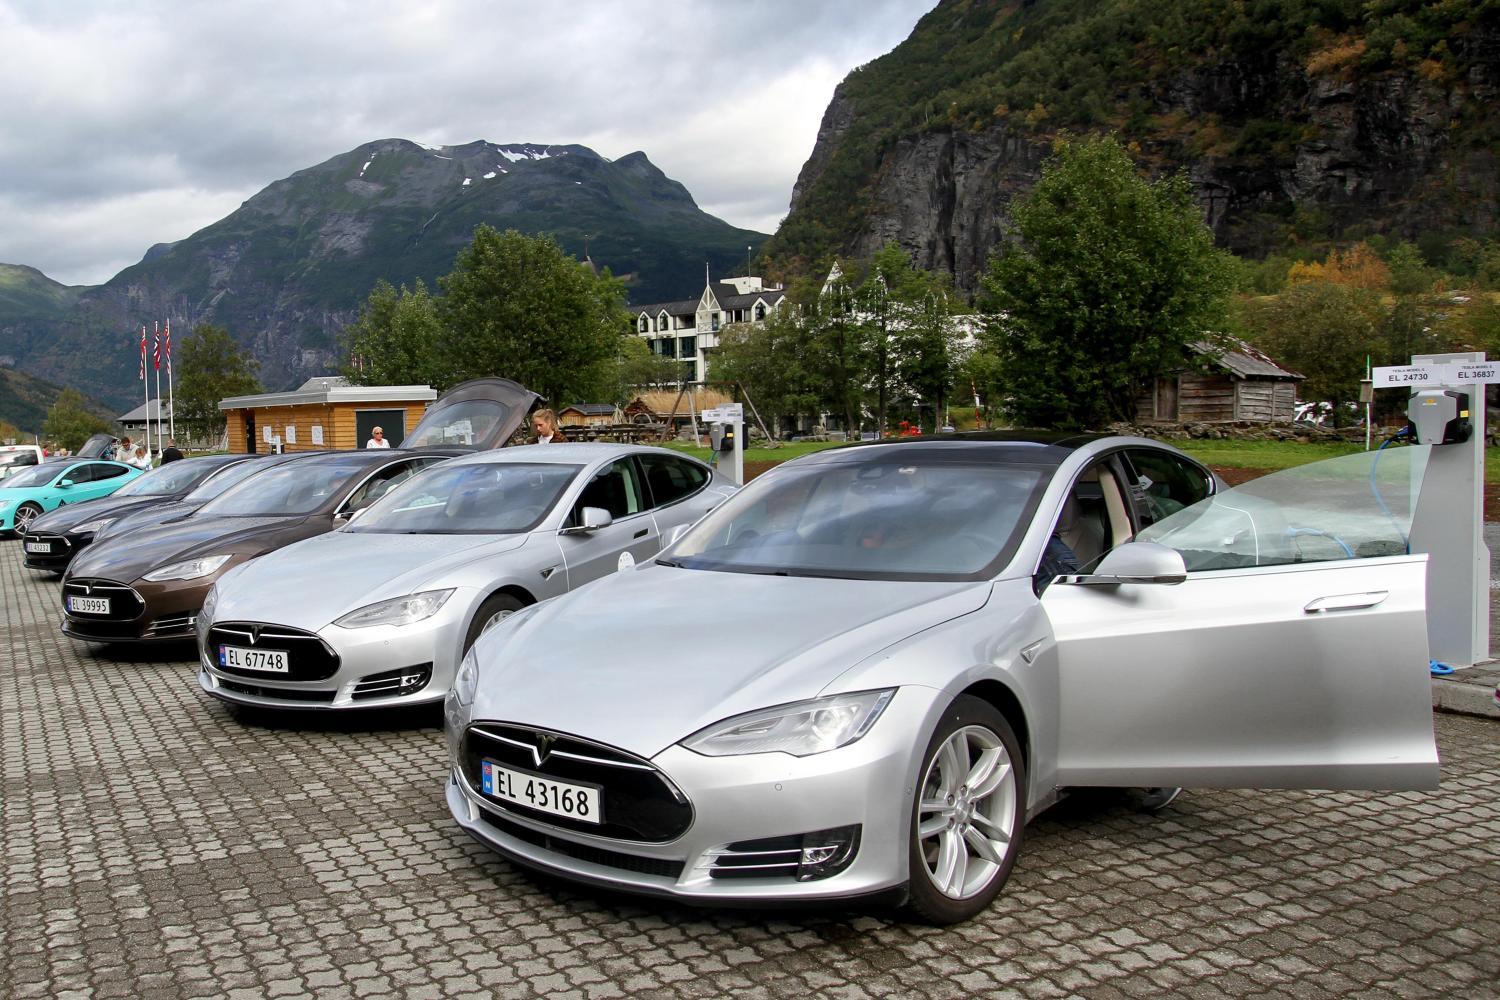 In Norway, the electric car predictions for 2040 and 2050 have been arriving much faster than transportation experts would assume. 30 percent of all cars registered in the country last month were zero-emissions vehicles. 